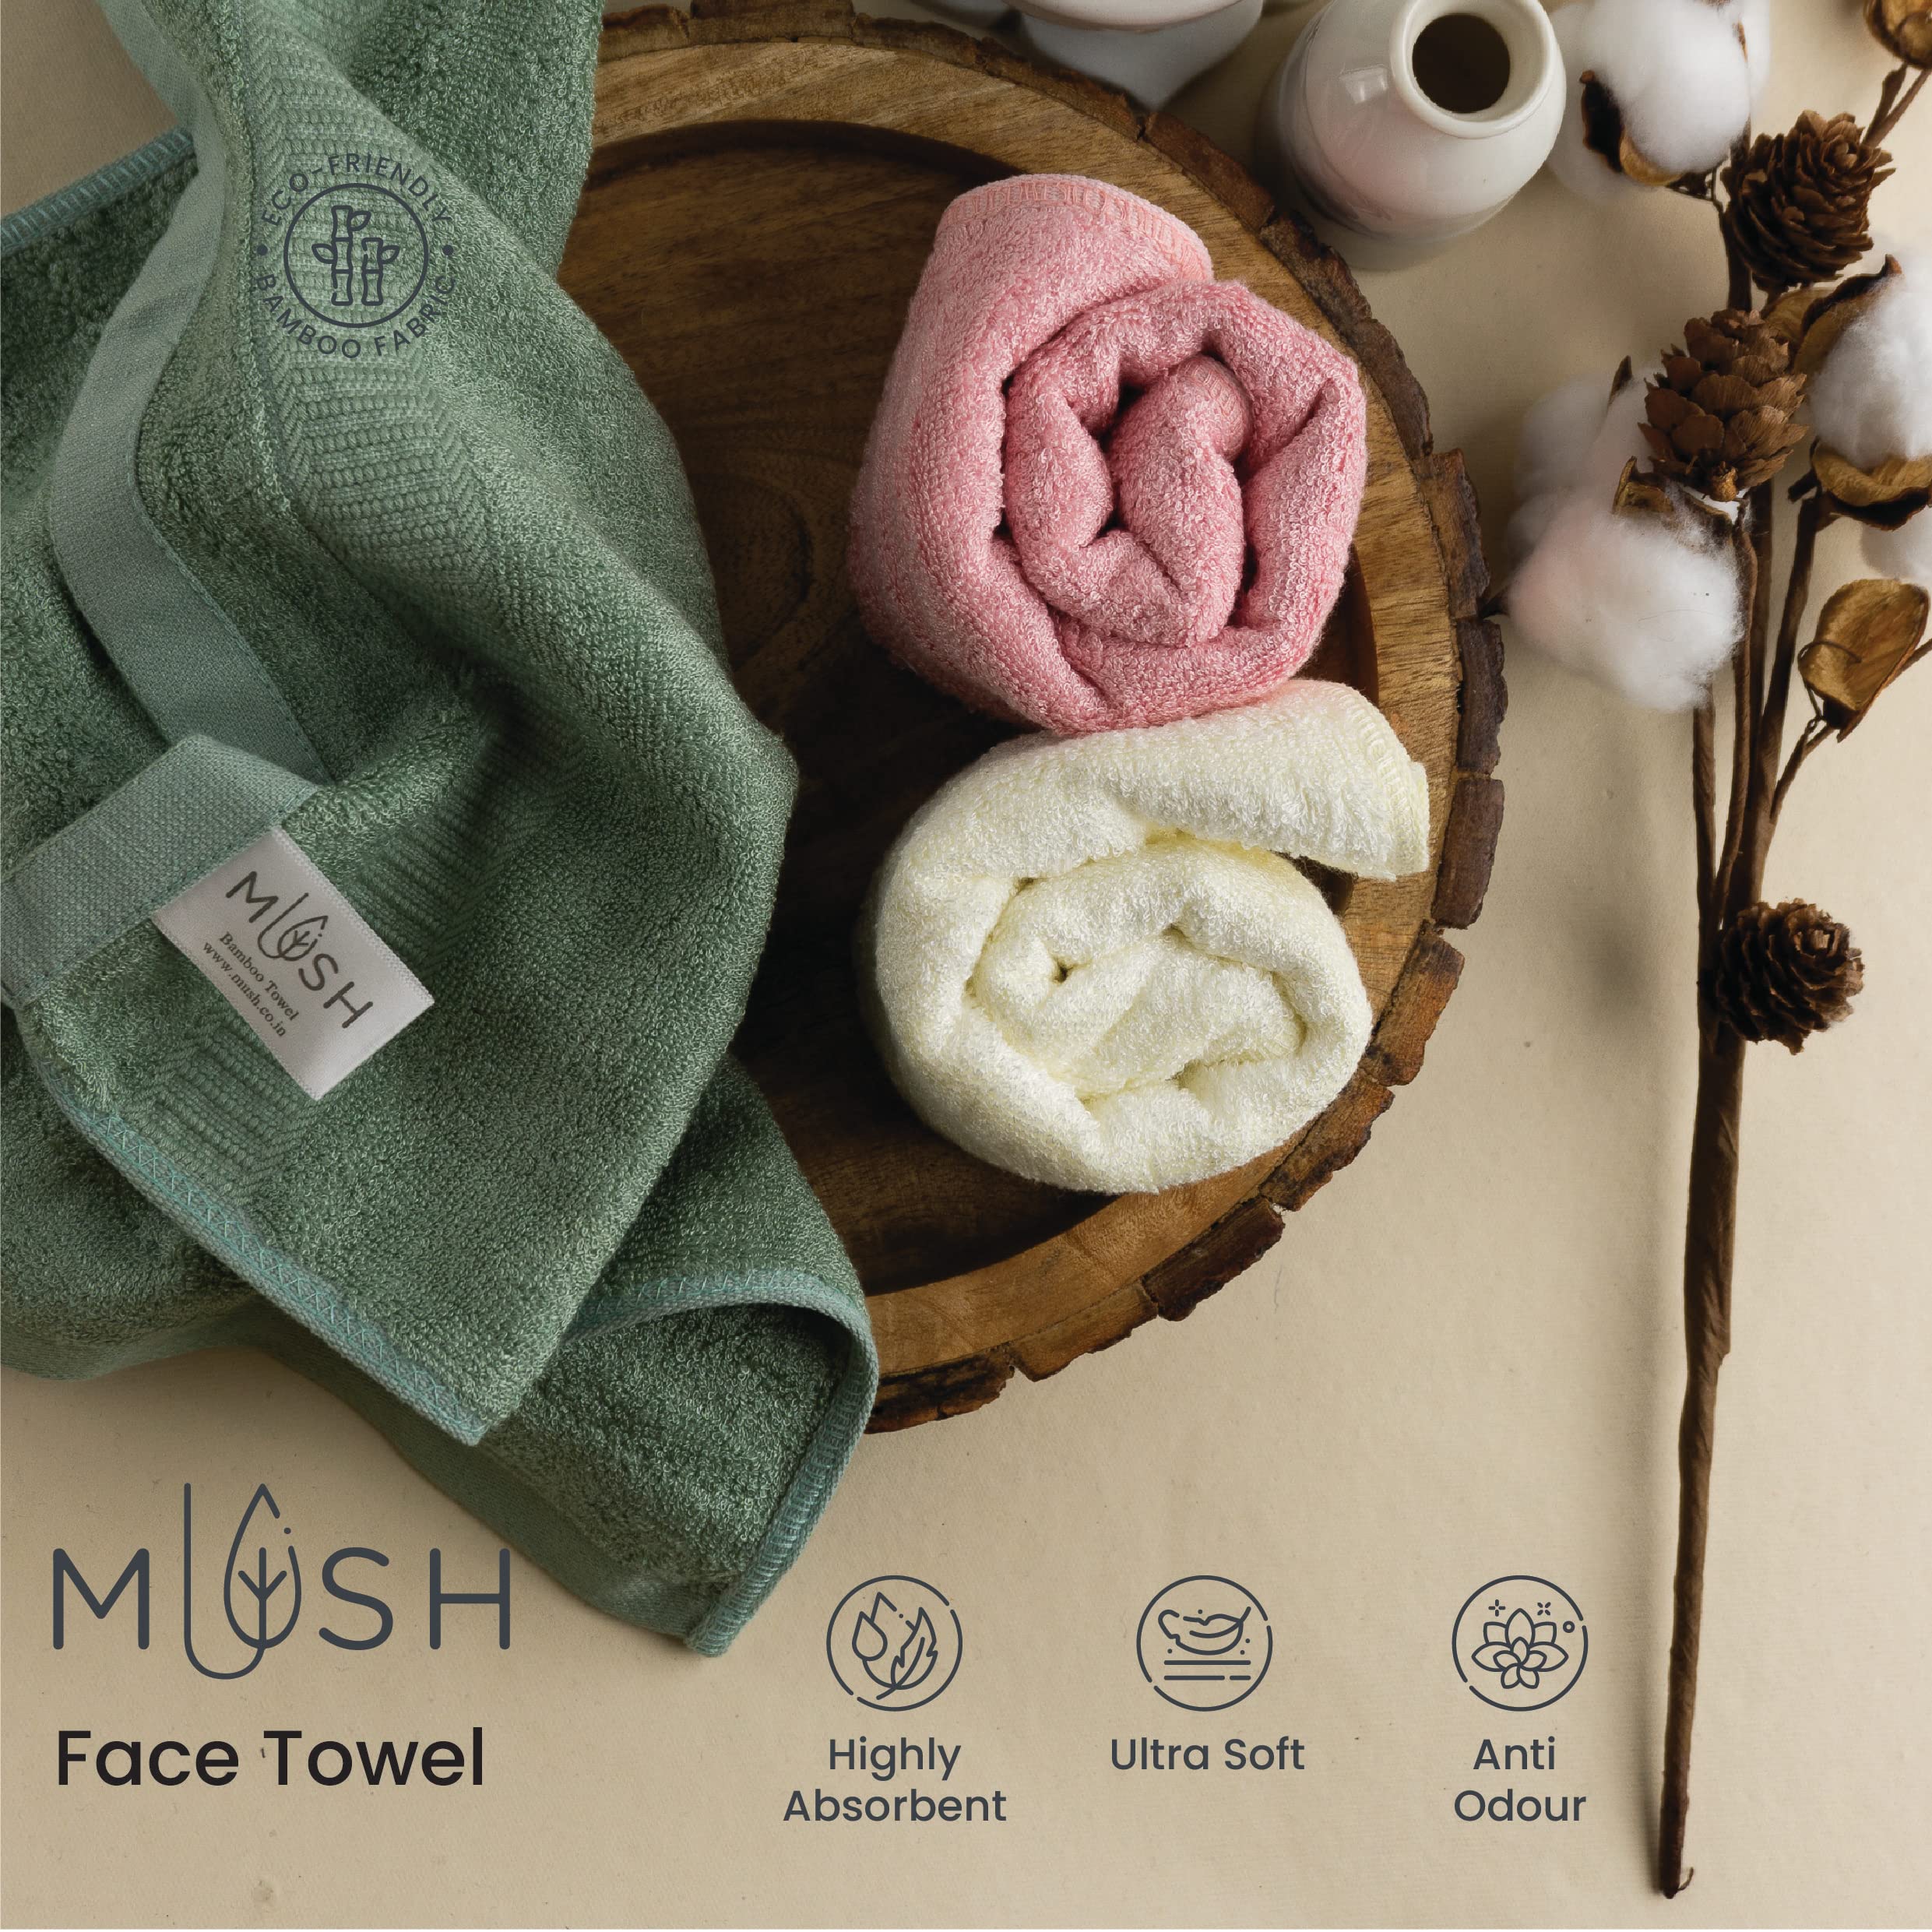 Mush 100% Bamboo Face Towel | Ultra Soft, Absorbent, & Quick Dry Towels for Facewash, Gym, Travel | Suitable for Sensitive/Acne Prone Skin | 13 x 13 Inches | 500 GSM Pack of 3 (White)